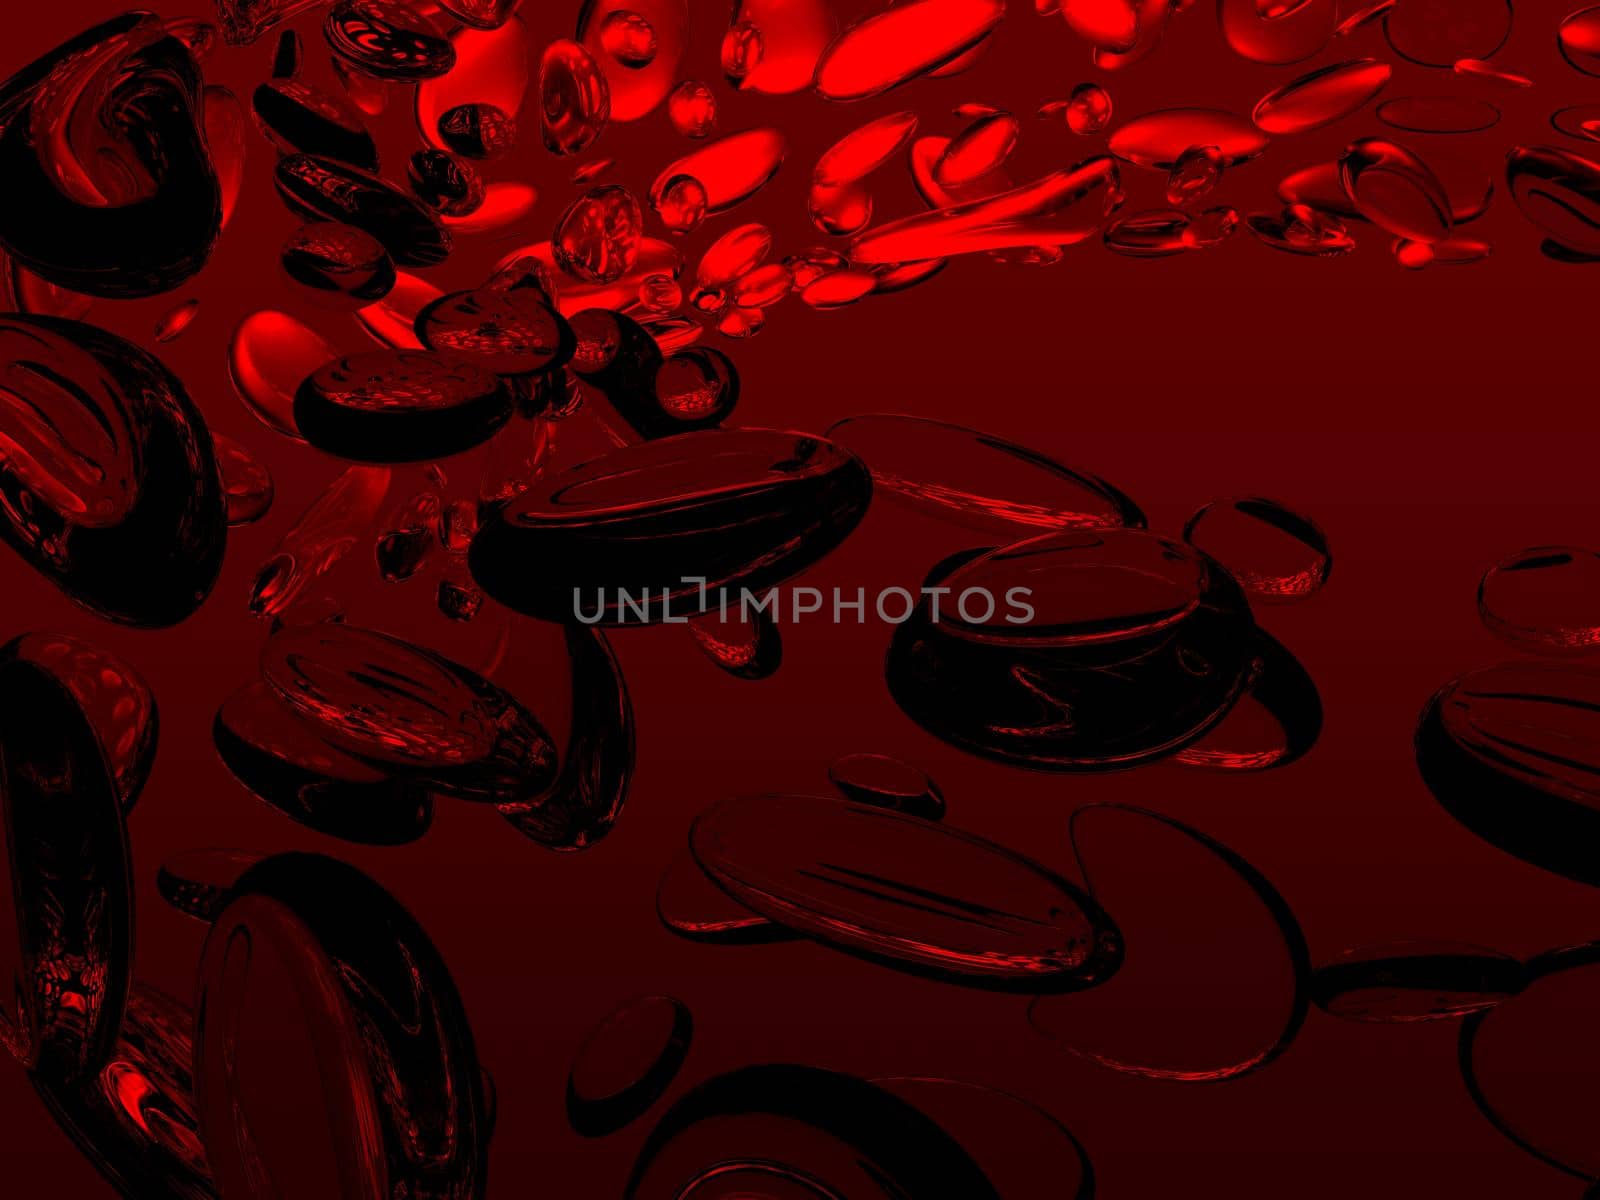 Swirl of water droplets on a red background. Abstract 3D illustration render